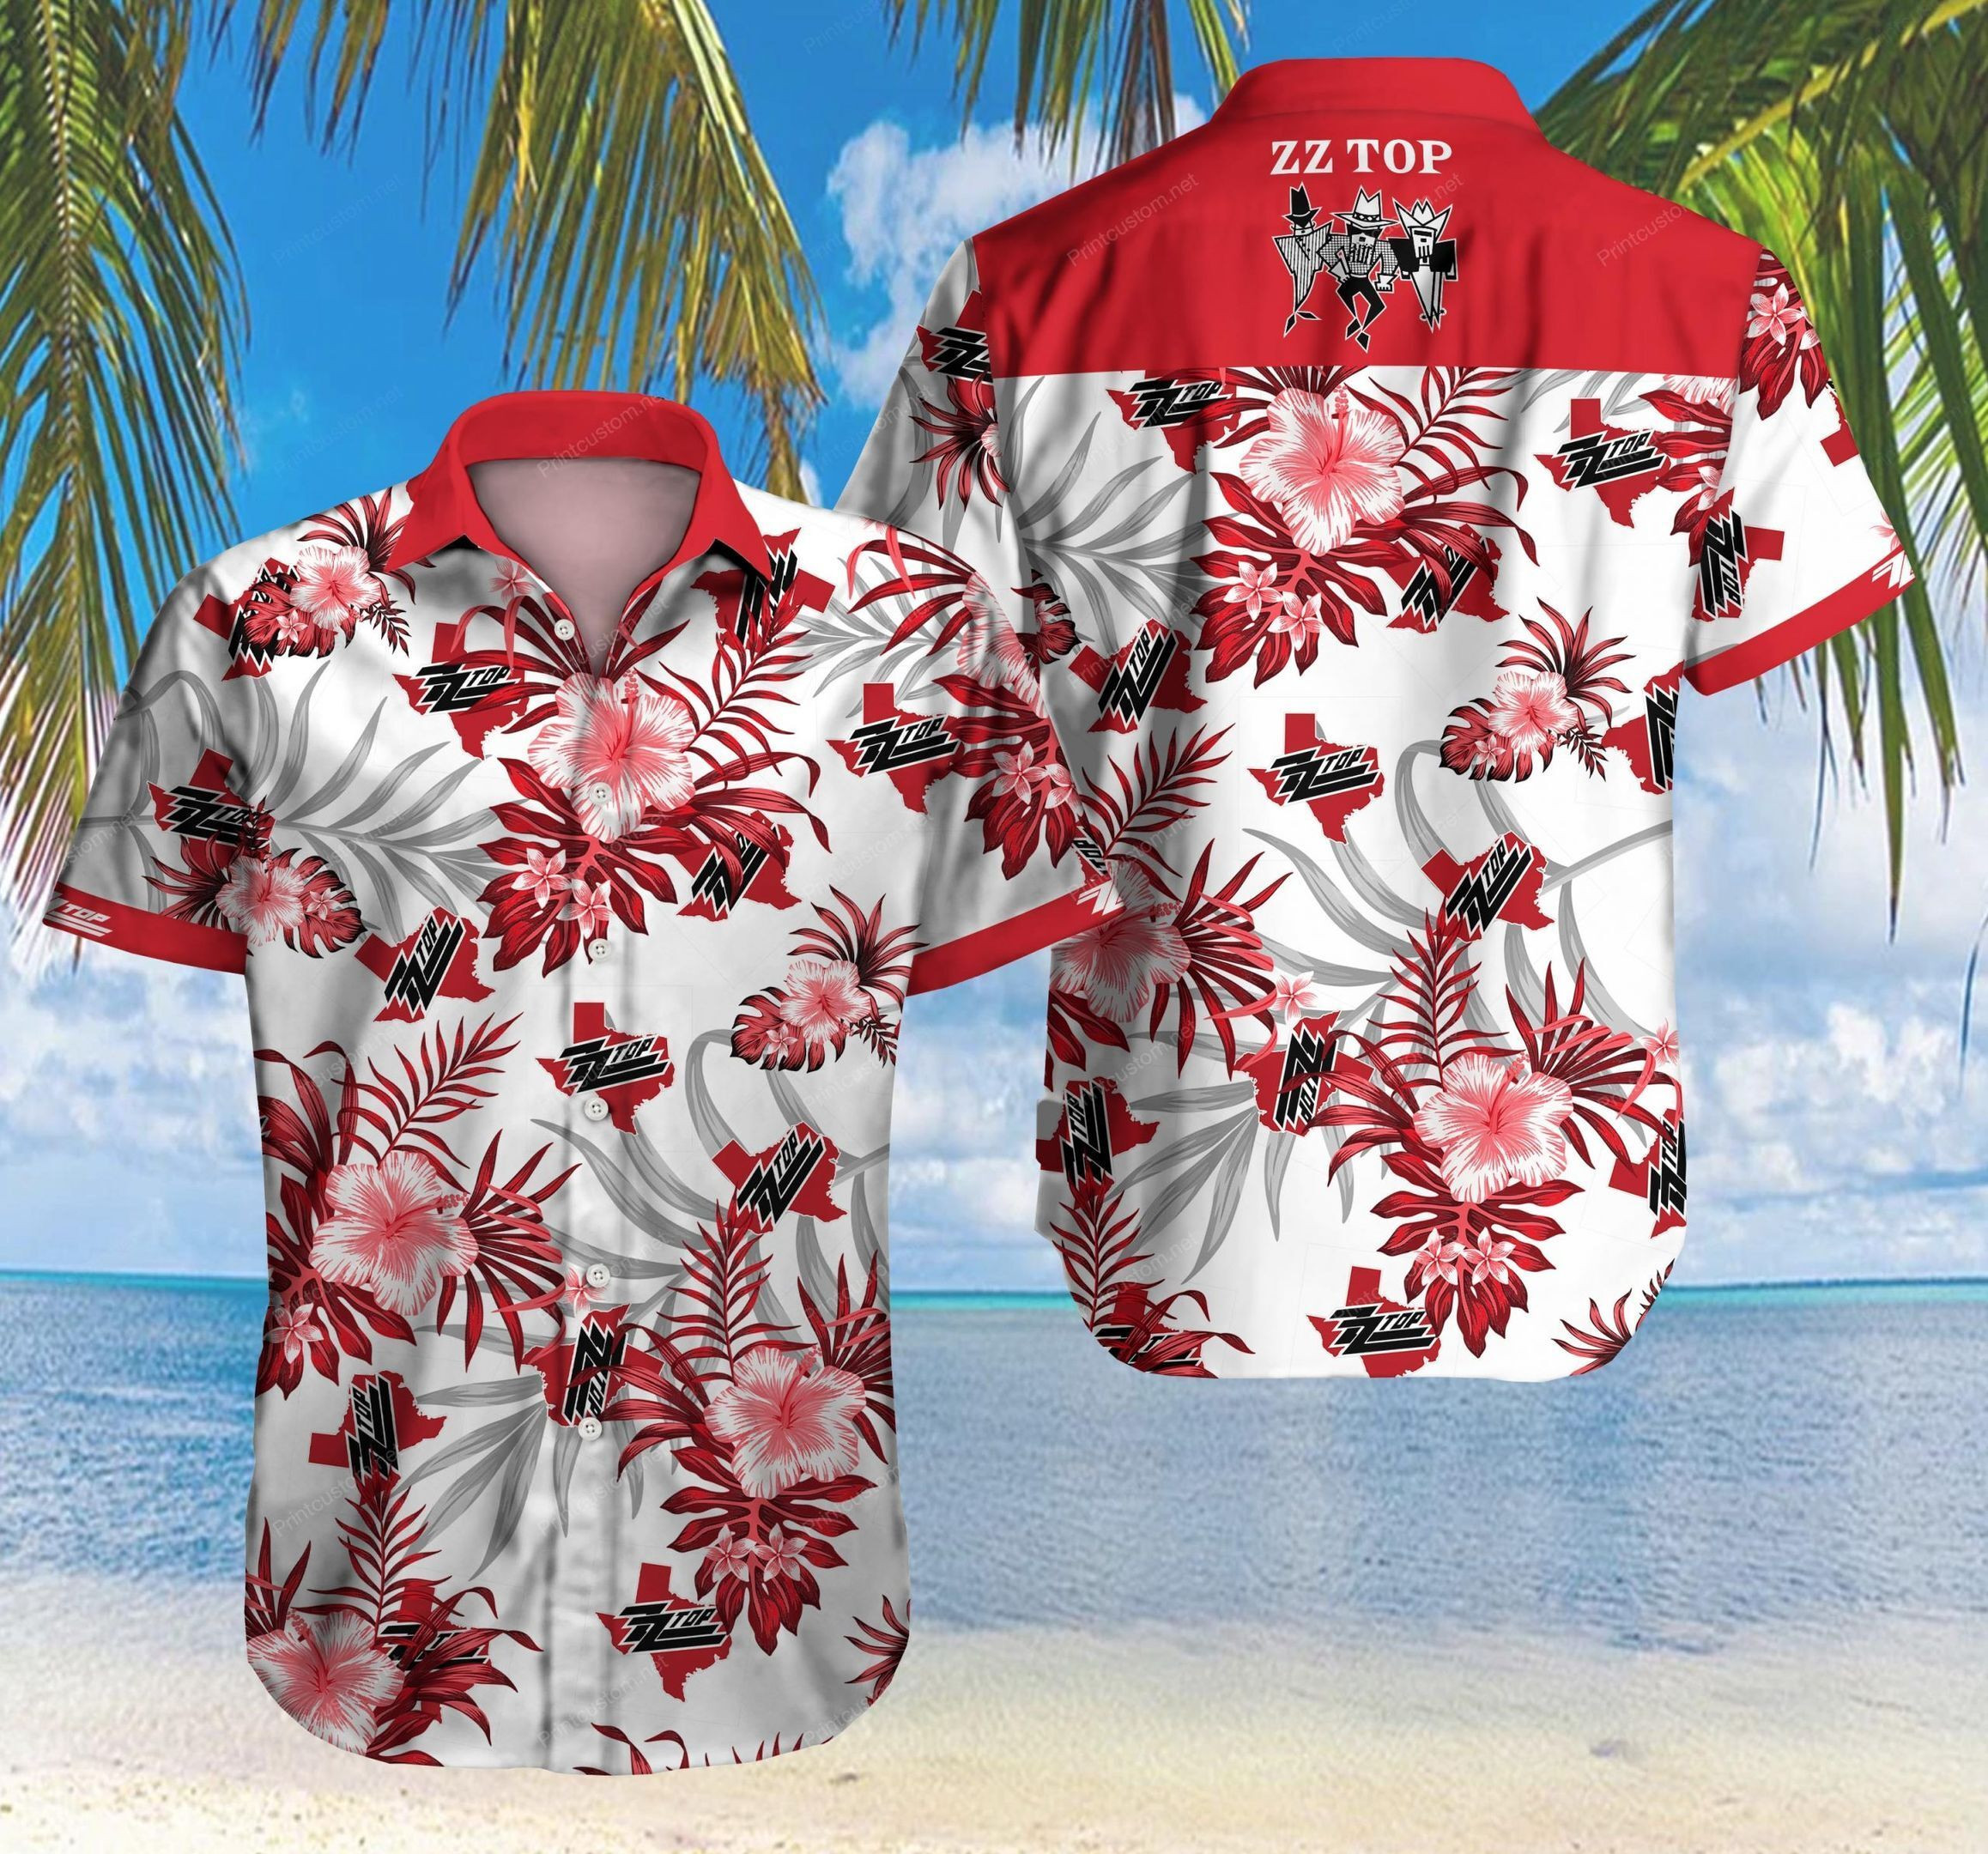 Read on to learn about the different types of Hawaiian shirts 222